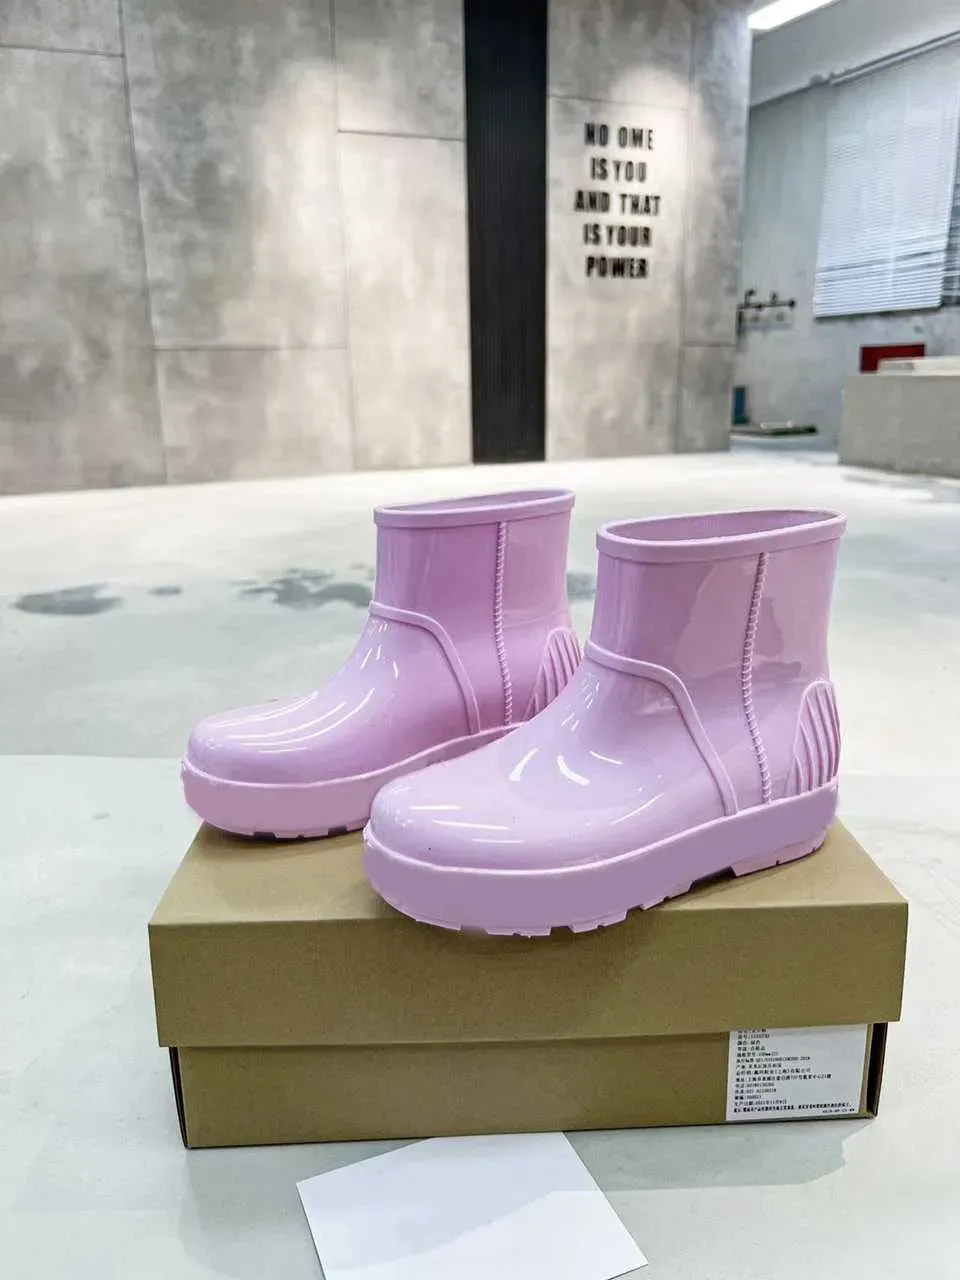 Designer Brand Snow Boots Fall Winter Women Rain Boot Candy Color Rubber Waterproof Shoes Walking Ankle Boots Casual Platform Booties PVC Cold Resistant Bootss